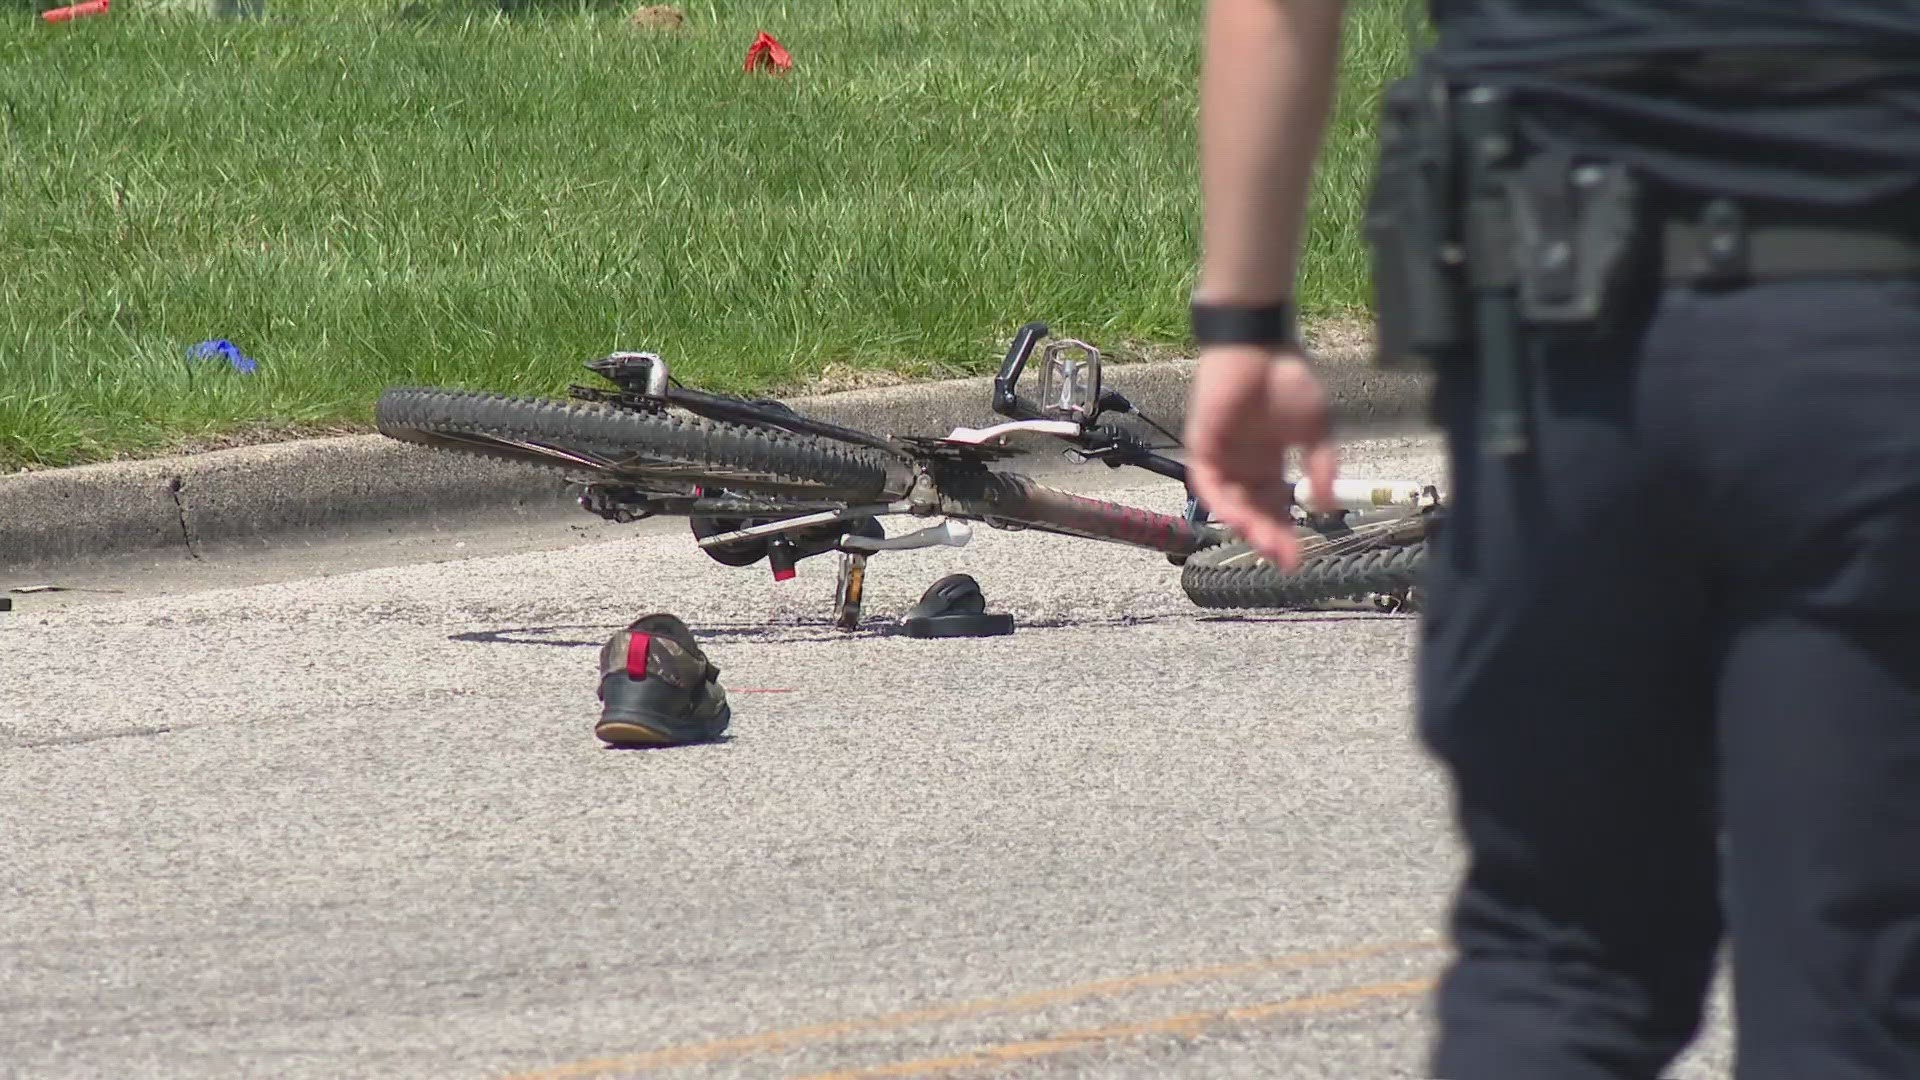 Police are investigating after a bicyclist was hit by a car on the west side of Indianapolis near the intersection of 38th Street and Kevin Way.